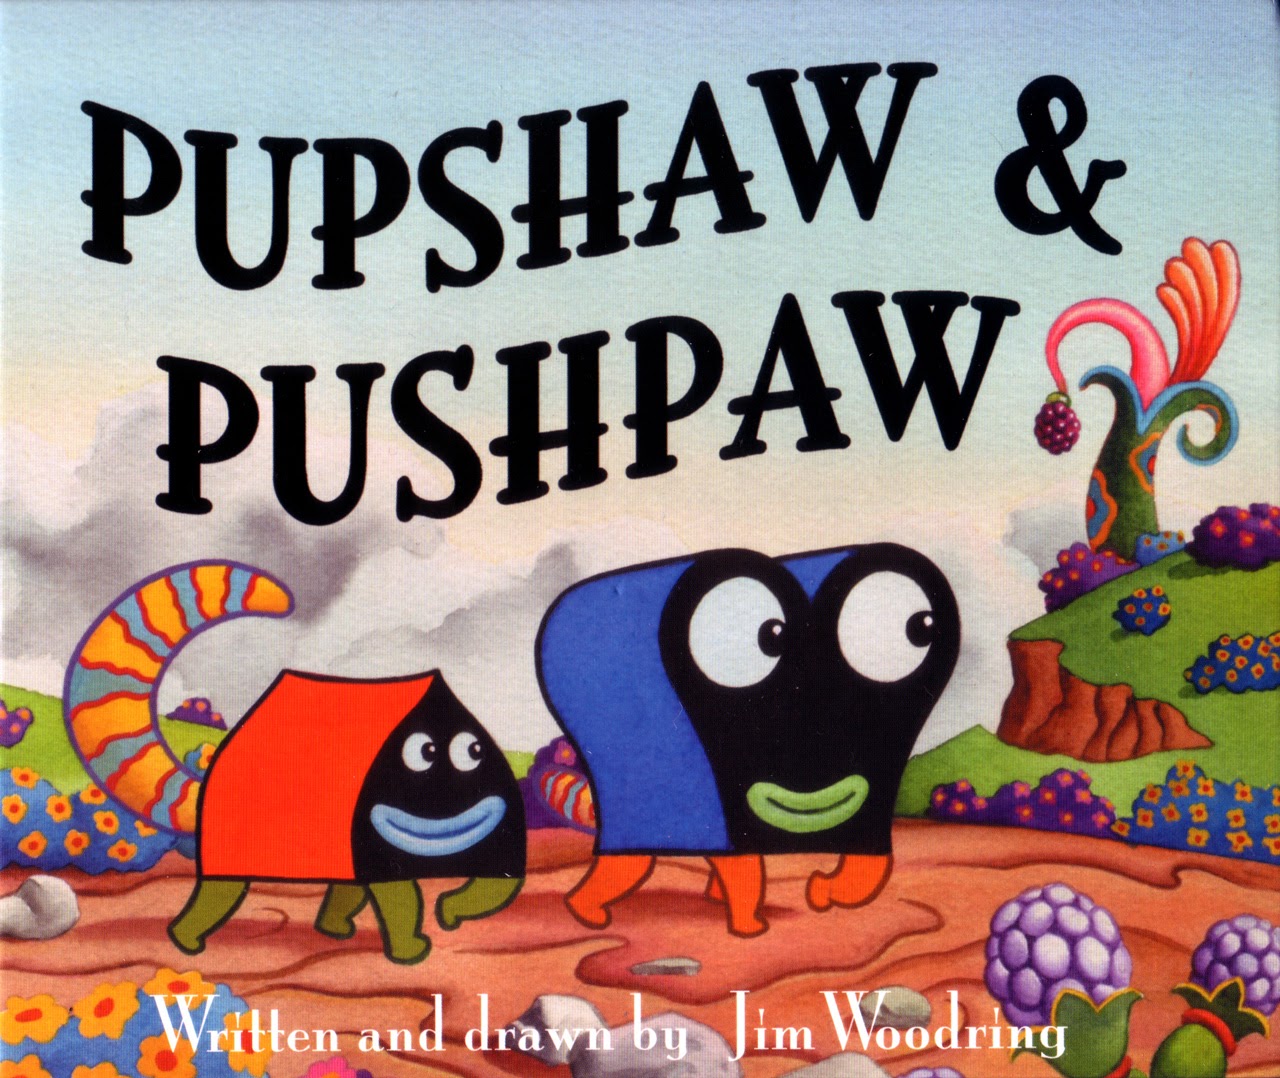 Read online Pupshaw and Pushpaw comic -  Issue # Full - 1